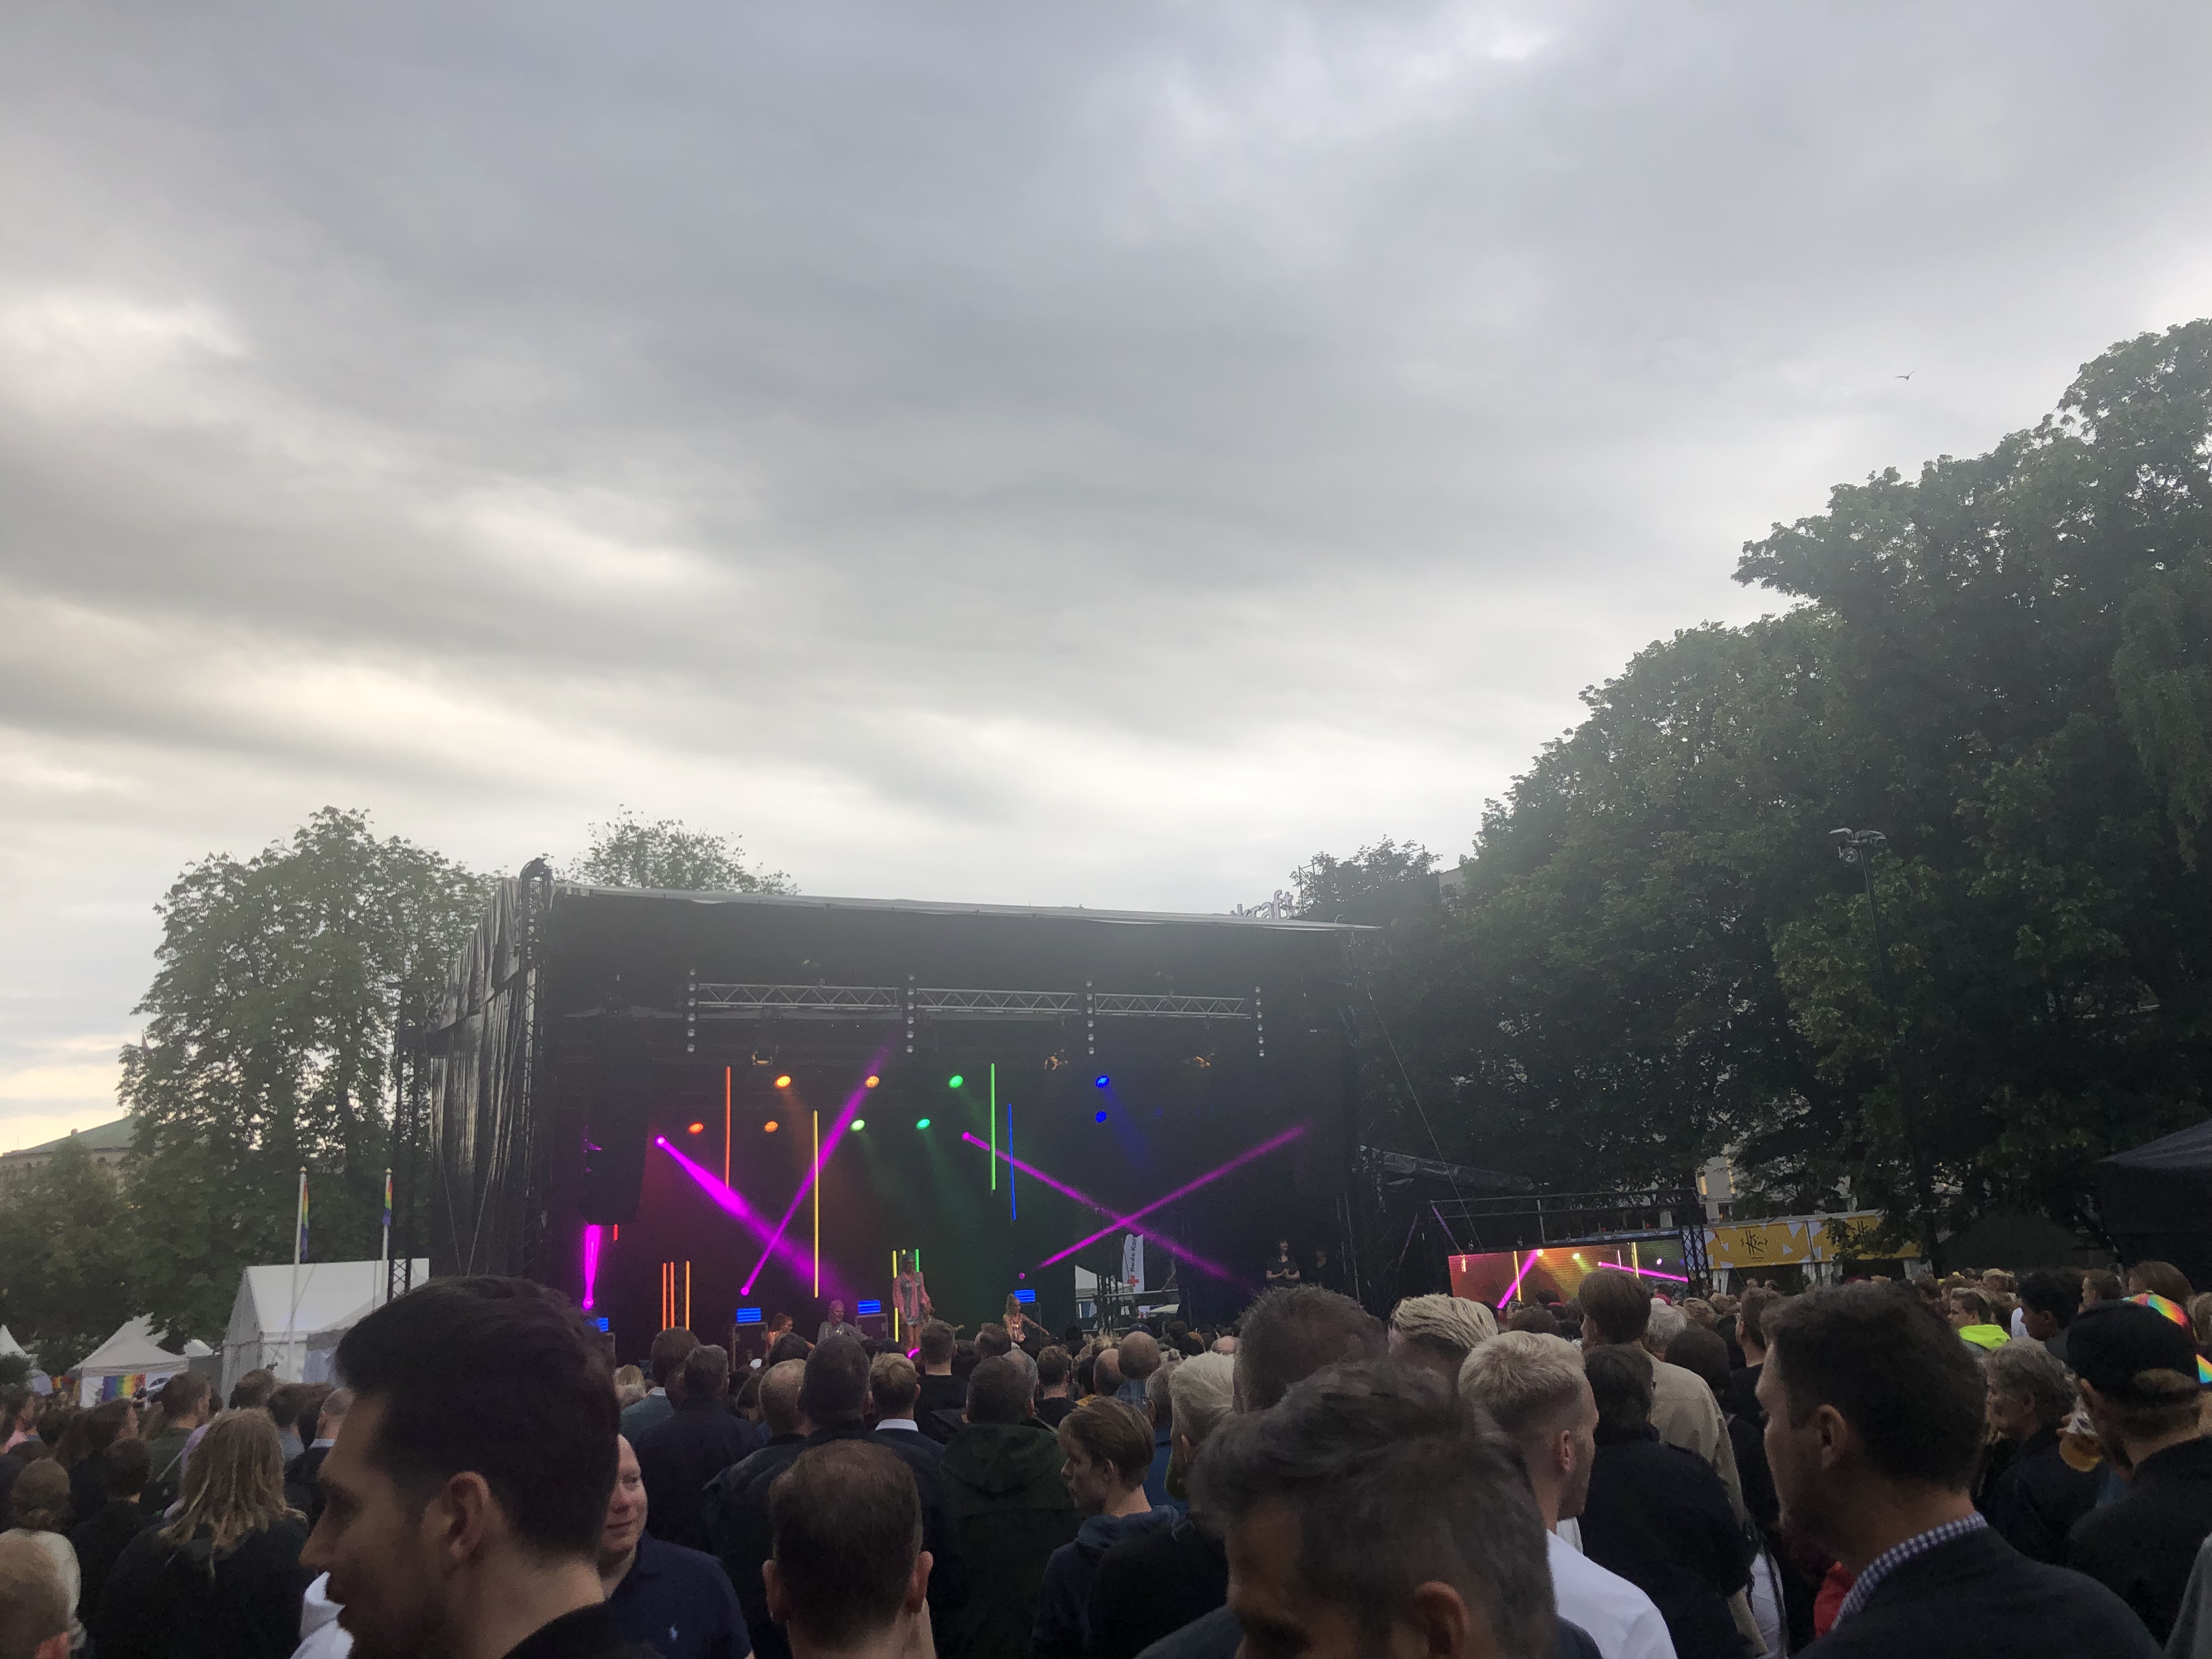 Oslo pride festival; large stage with flashing lights of all colors. Many people around. Gray skies.